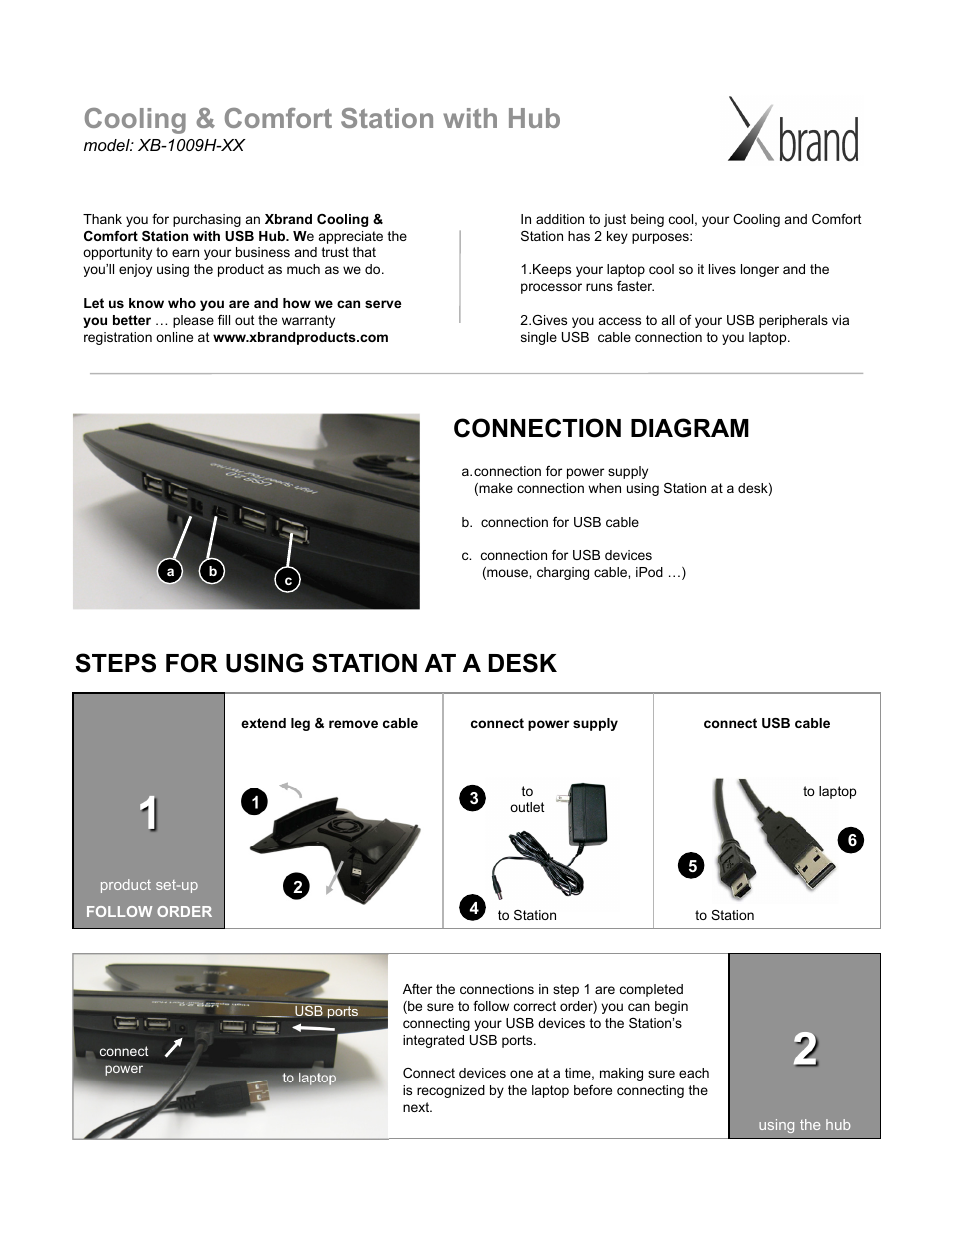 Xbrand Cooling & Comfort Station with Hub XB-1009H-XX User Manual | 2 pages